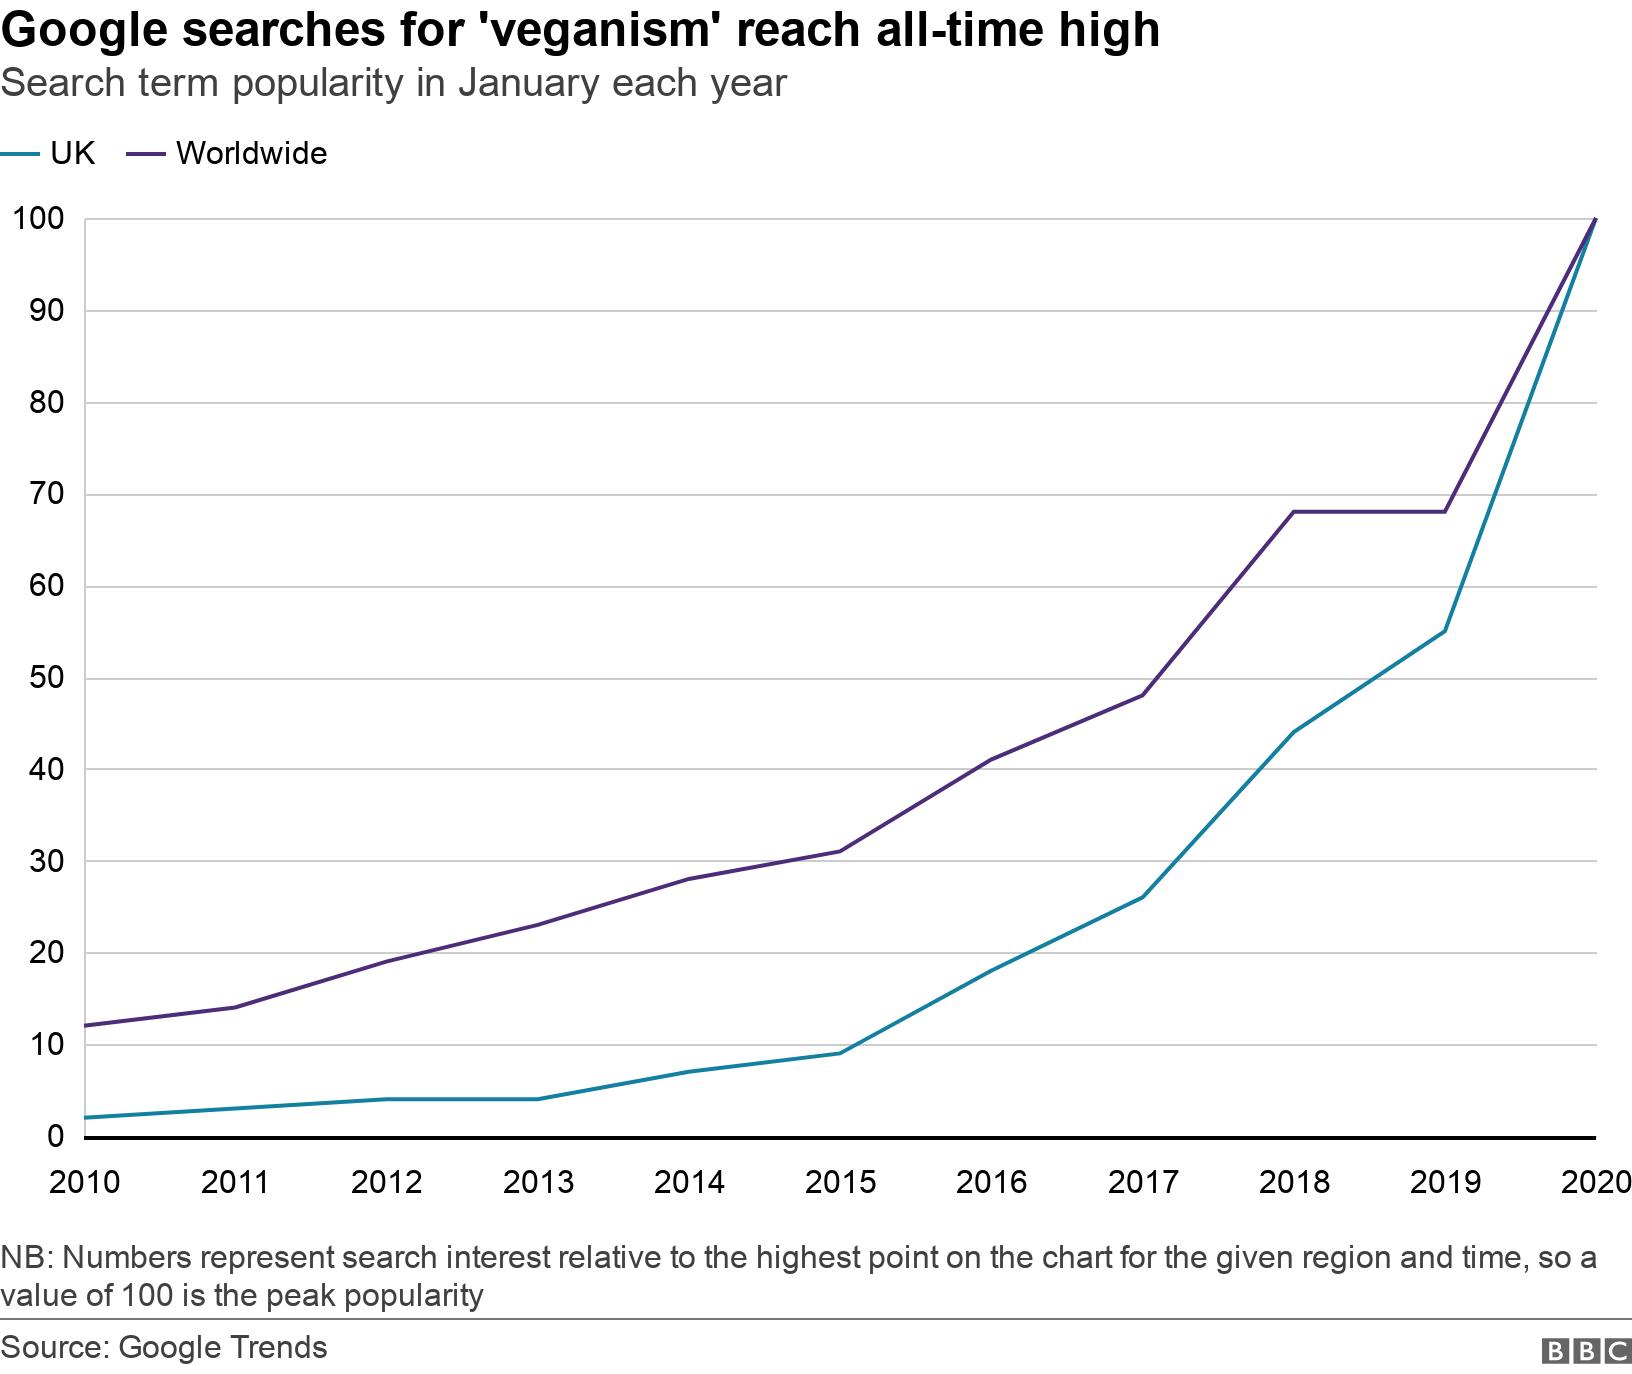 Google searches for 'veganism' reach all-time high. Search term popularity in January each year. Chart shows increased search popularity for the term "veganism" over the last 10 years NB: Numbers represent search interest relative to the highest point on the chart for the given region and time, so a value of 100 is the peak popularity.